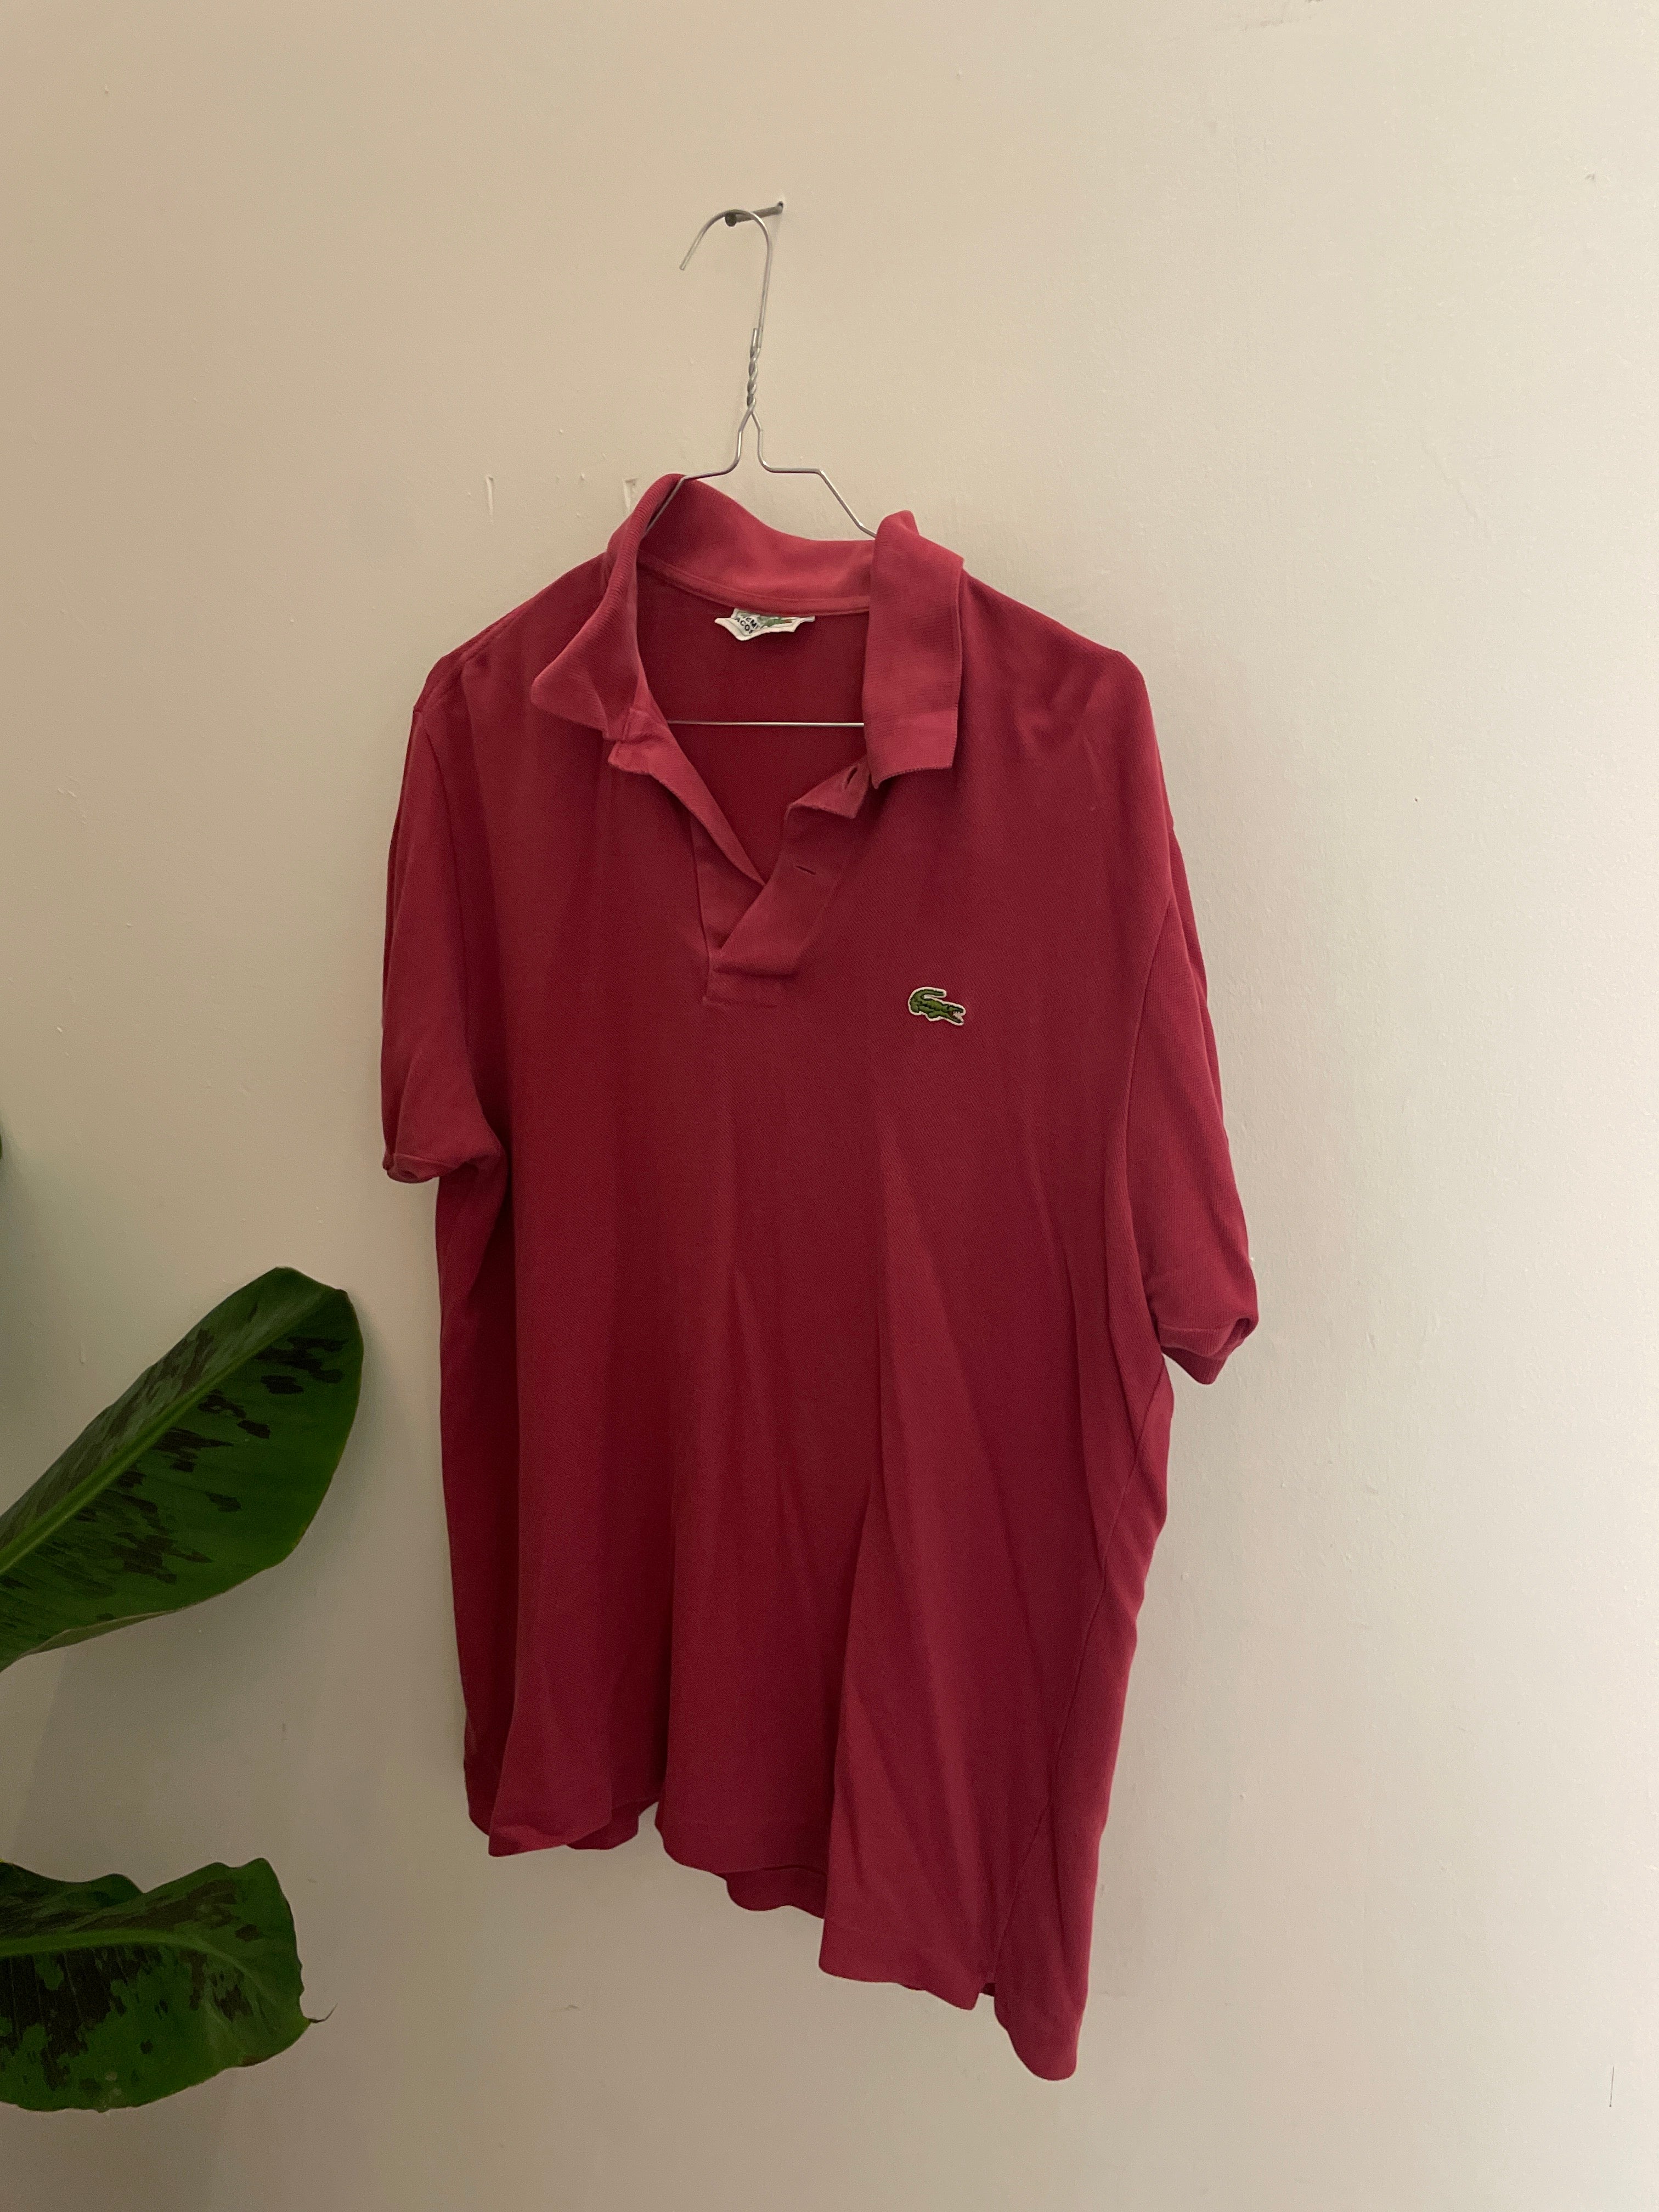 Vintage red lacoste chemise mens polo shirt size M